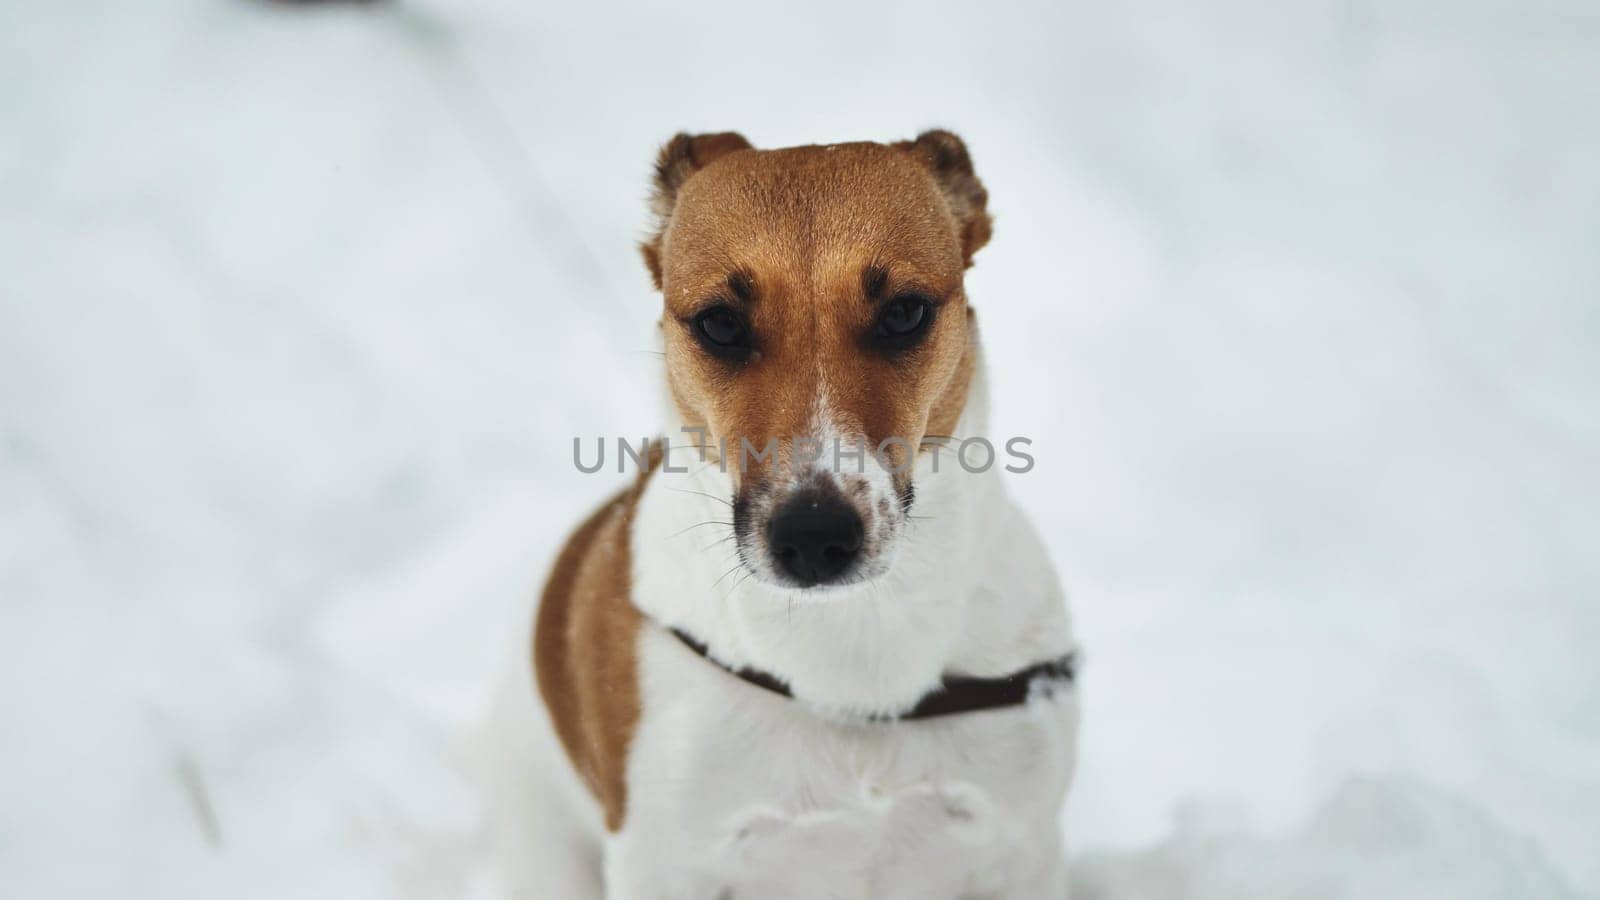 A Jack Russell Terrier shivers in the winter snow. by DovidPro